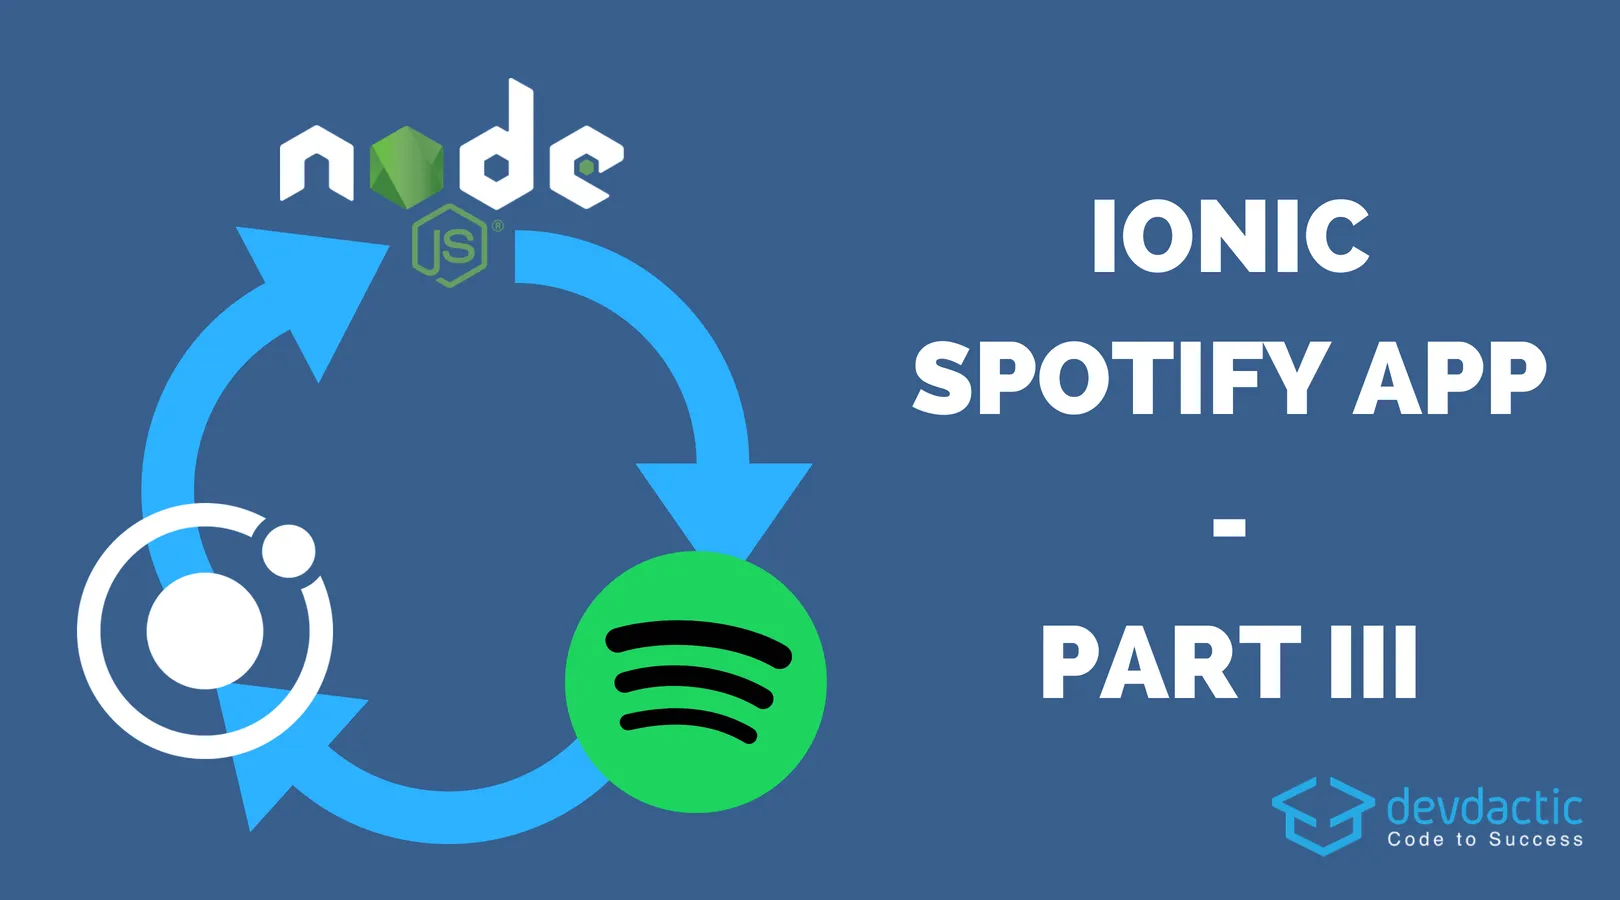 Building an Ionic Spotify App - Part 3: Native Spotify Integration